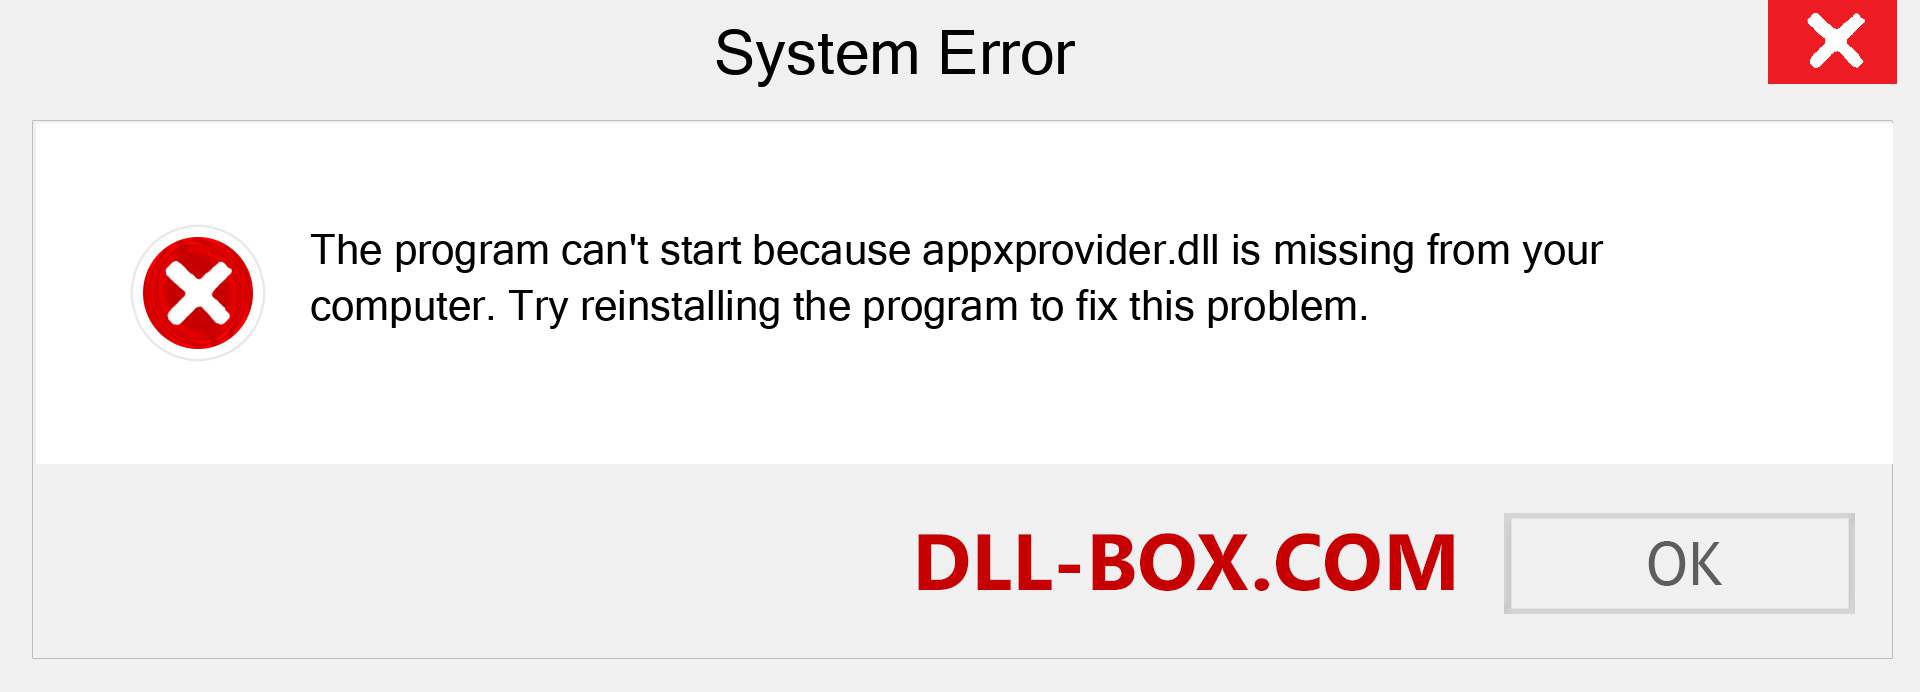  appxprovider.dll file is missing?. Download for Windows 7, 8, 10 - Fix  appxprovider dll Missing Error on Windows, photos, images